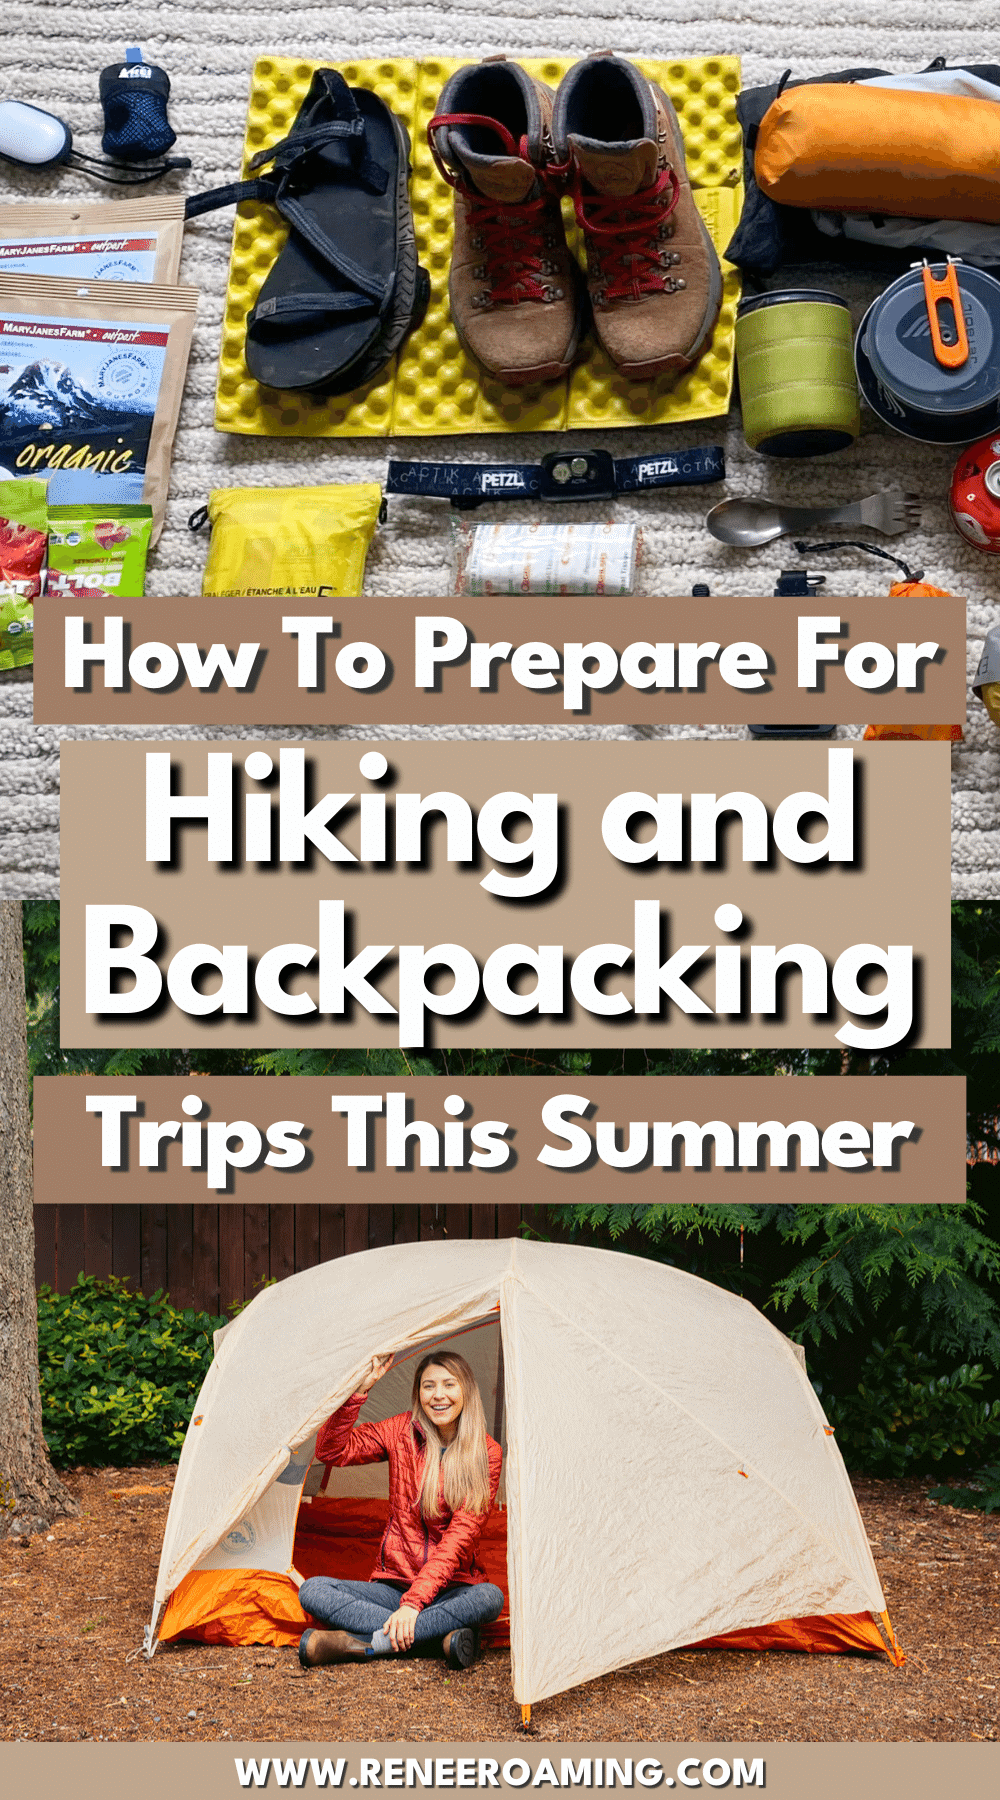 How To Prepare for Hiking and Backpacking Trips